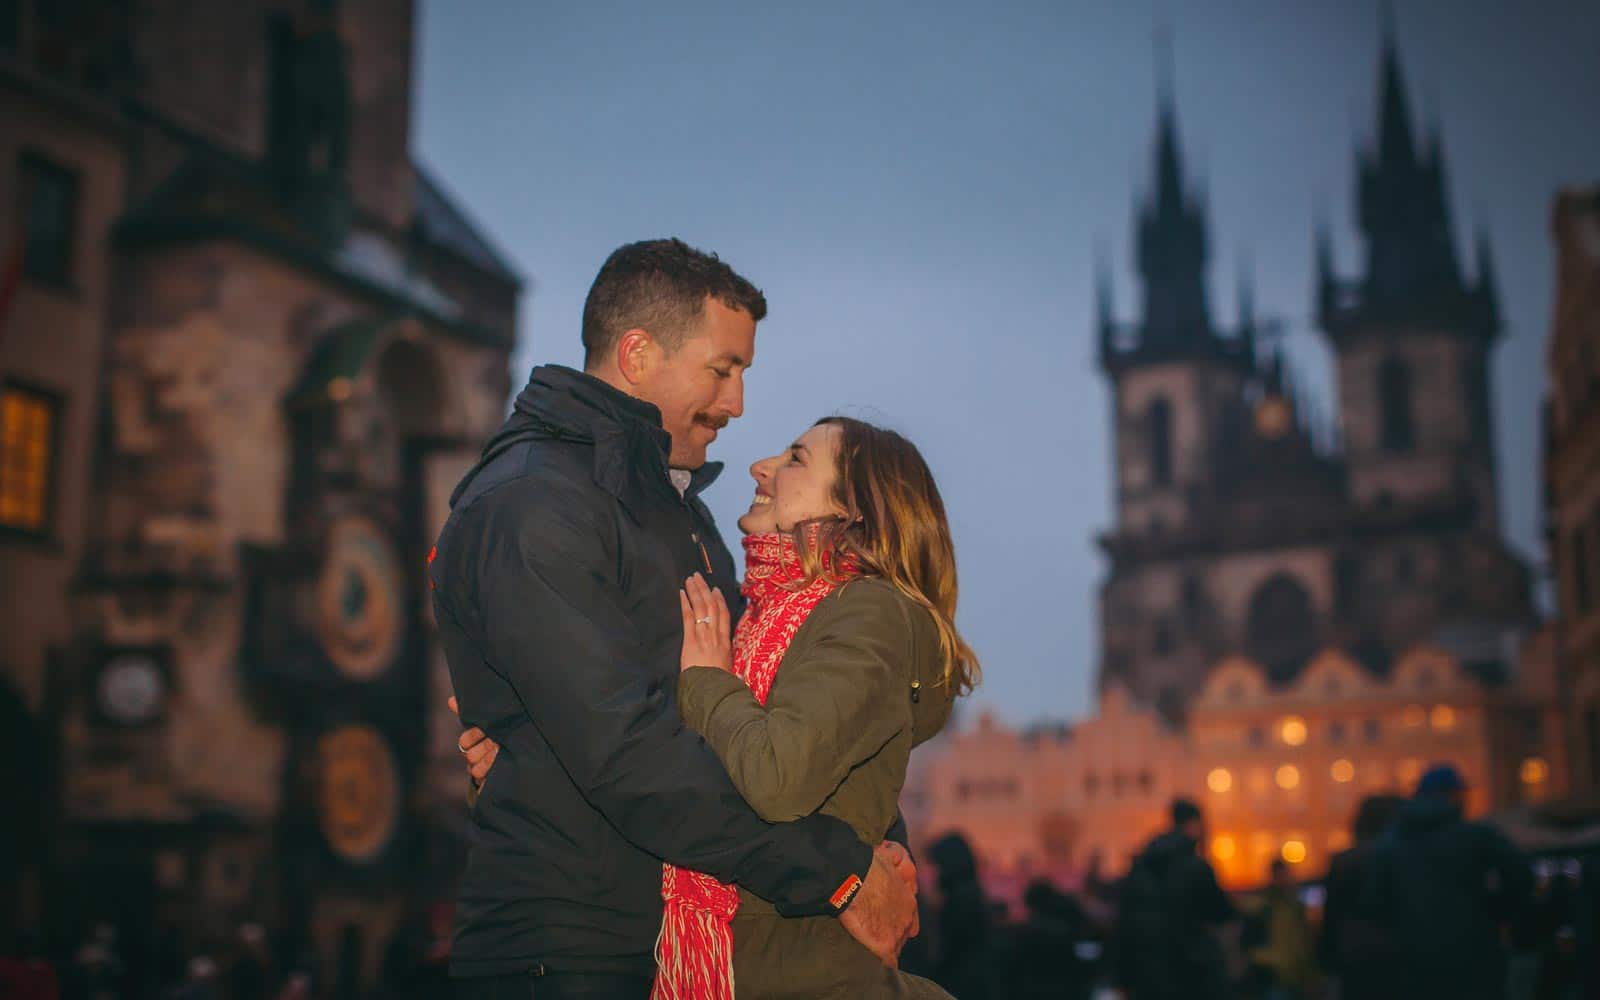 marriage proposal prague: N & J / photography session